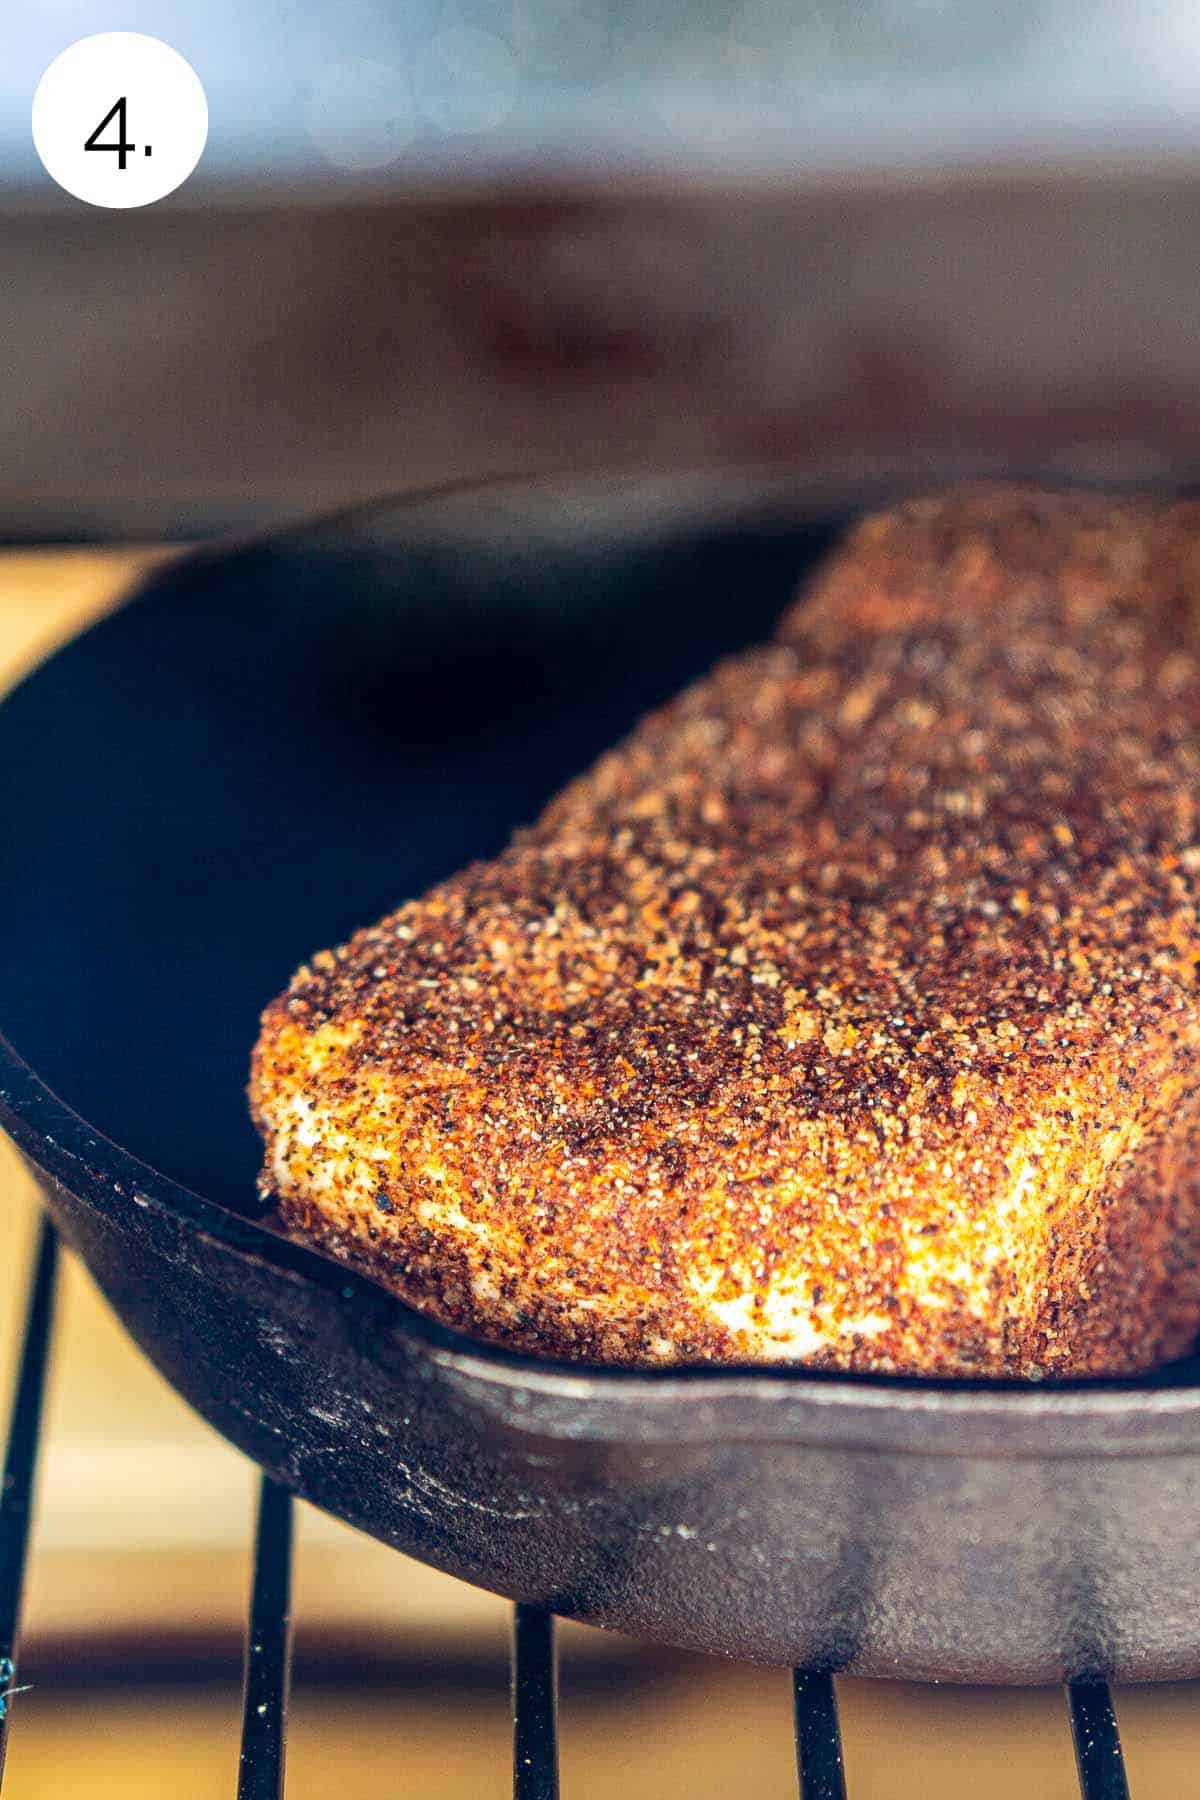 The seasoned cream cheese in a miniature cast-iron skillet on the grill grates before closing the lid to smoke.